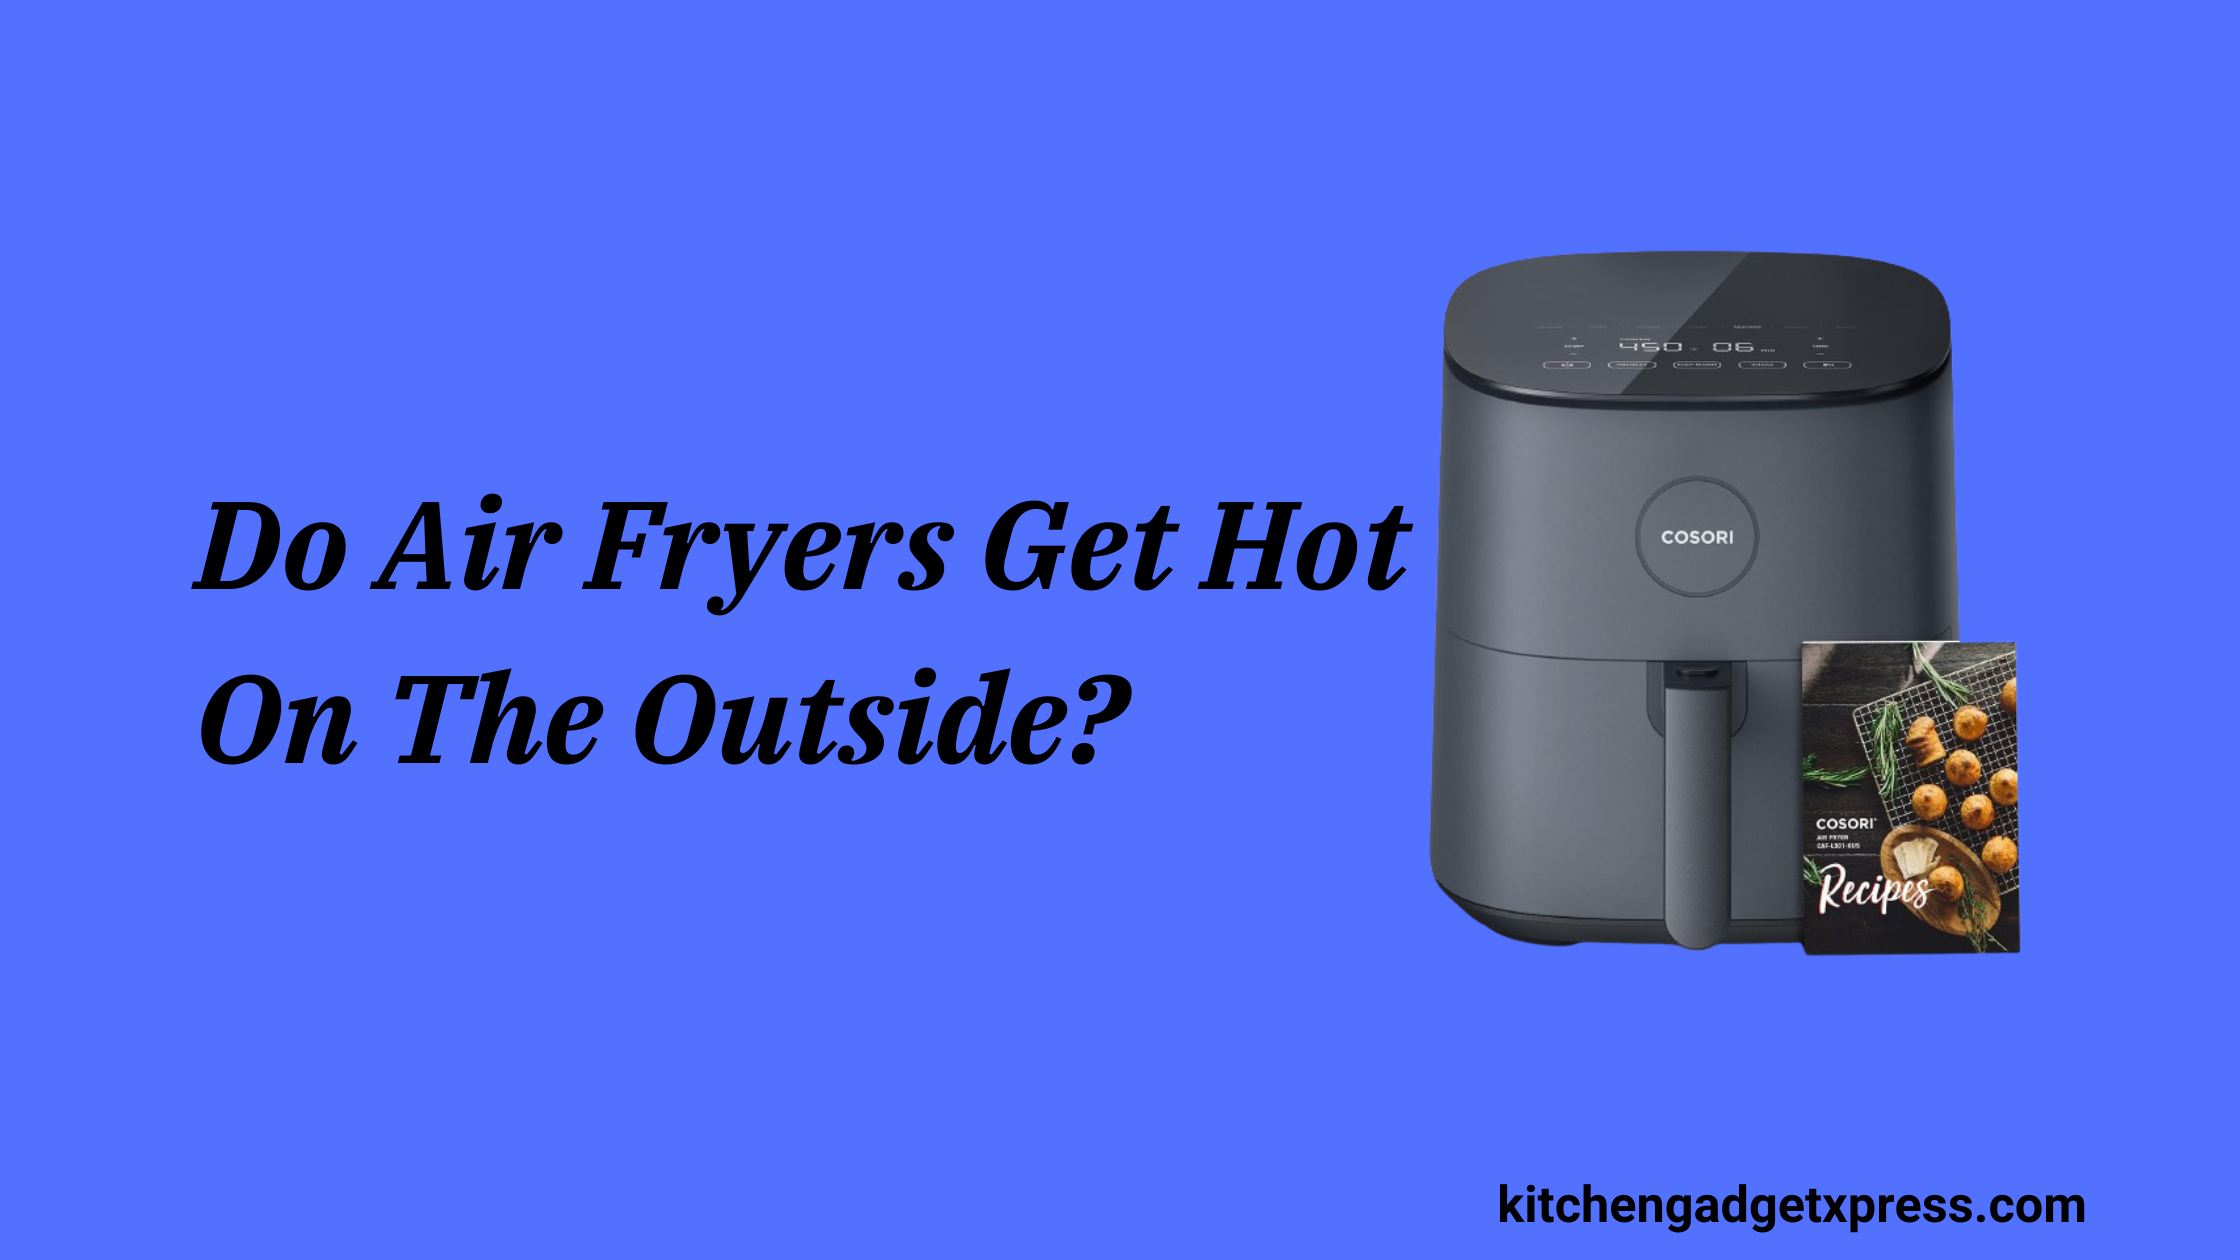 Do Air Fryers Get Hot On The Outside?